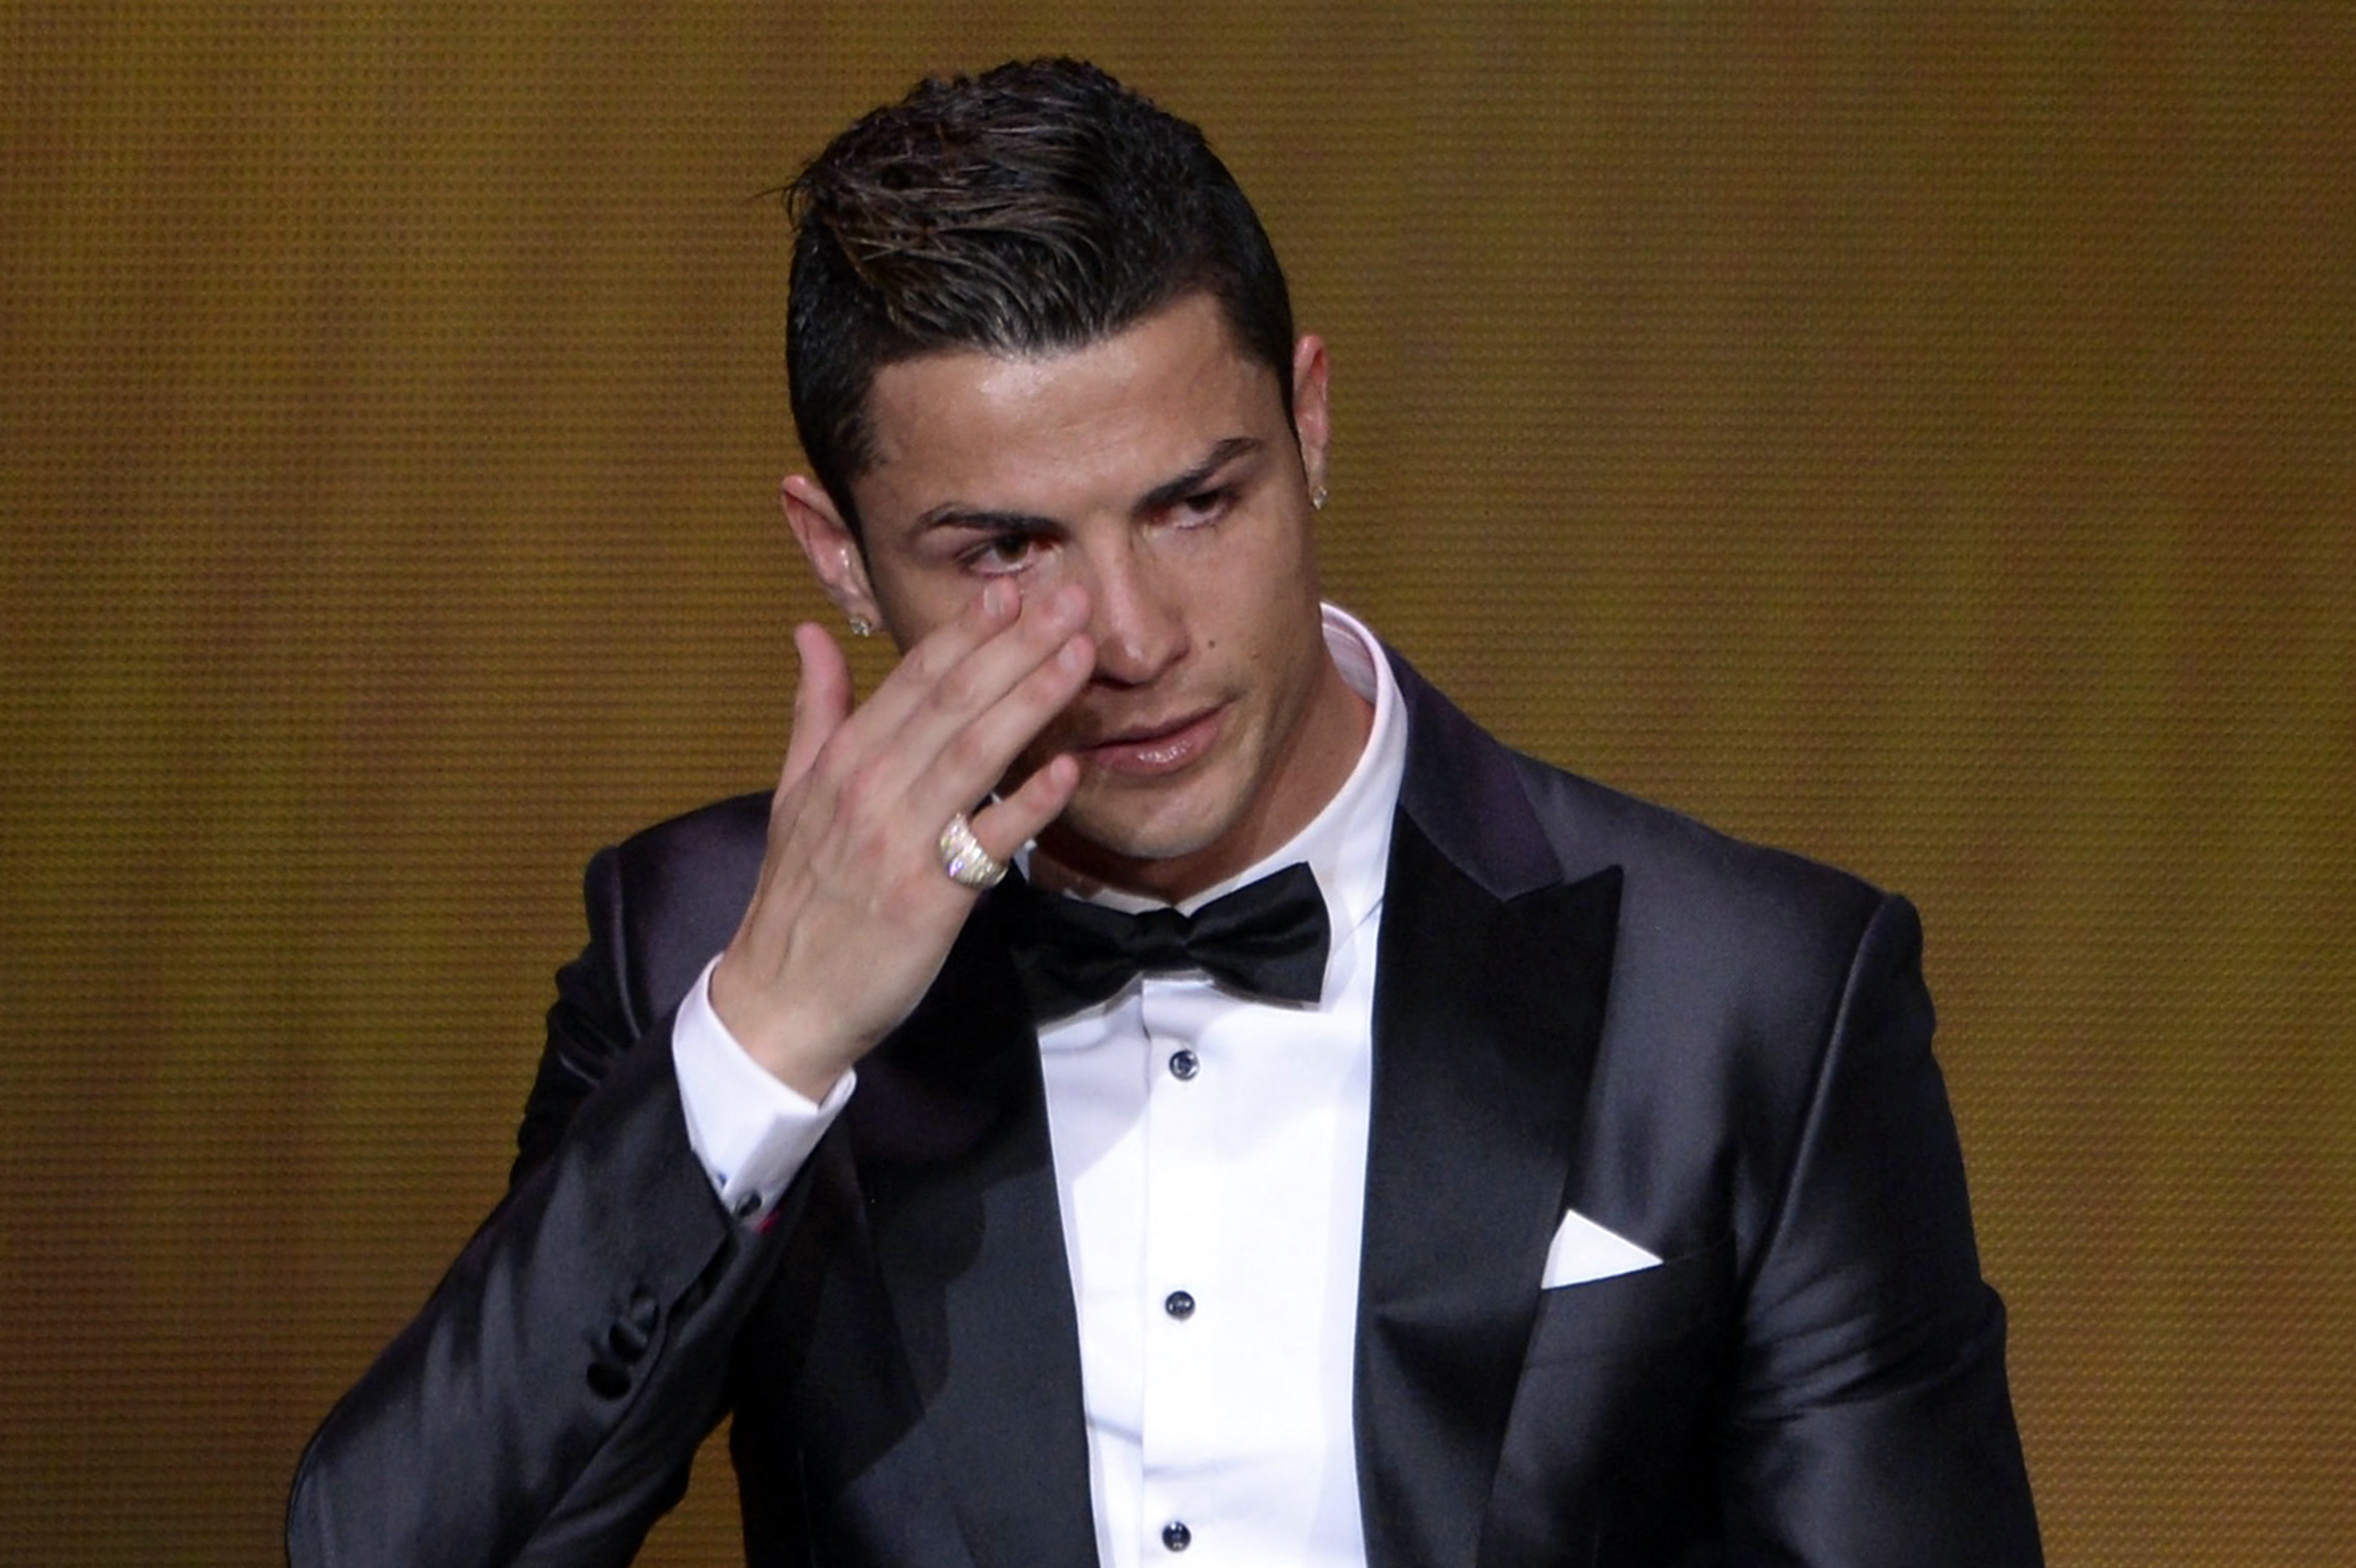 Cristiano Ronaldo at the FIFA Ballon d'Or Award ceremony in Zürich, Switzerland on January 13, 2014 | Source: Getty Images